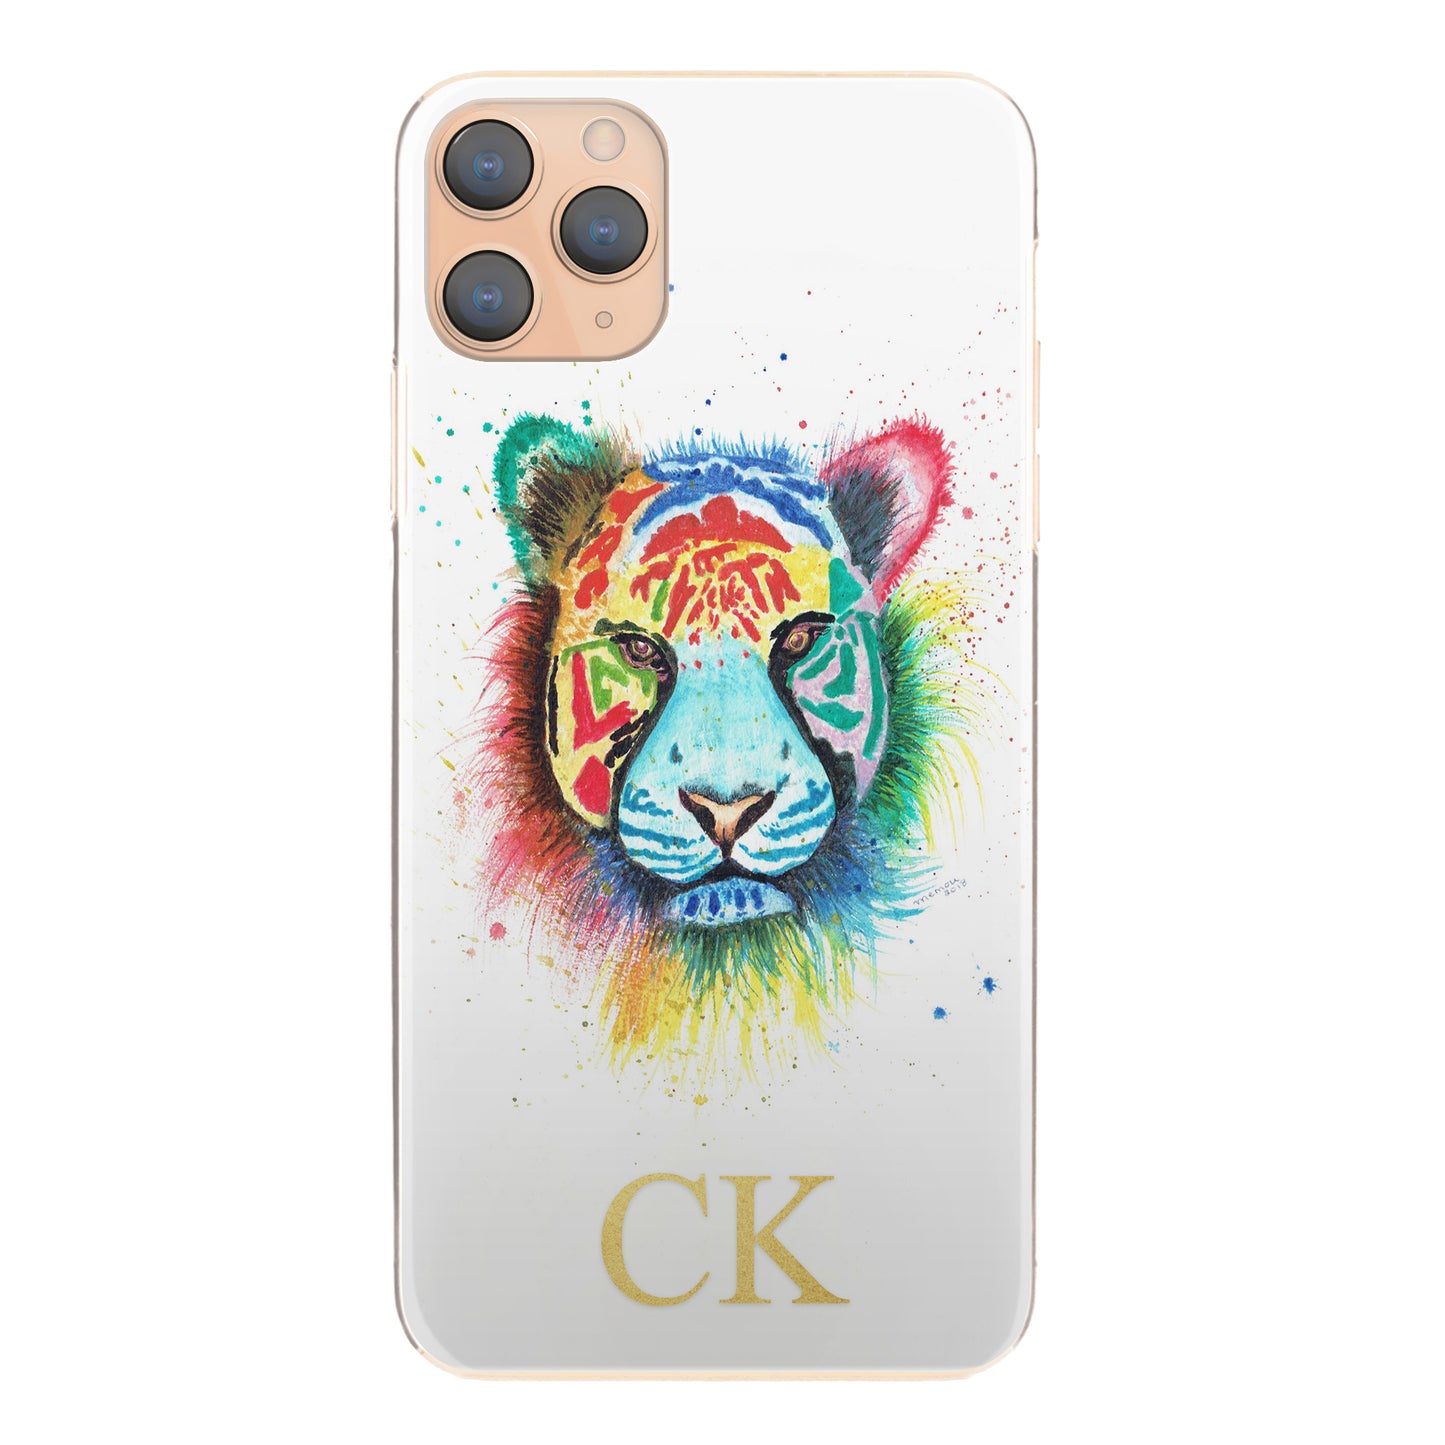 Personalised Huawei Phone Hard Case with Rainbow Tiger and Gold Initials